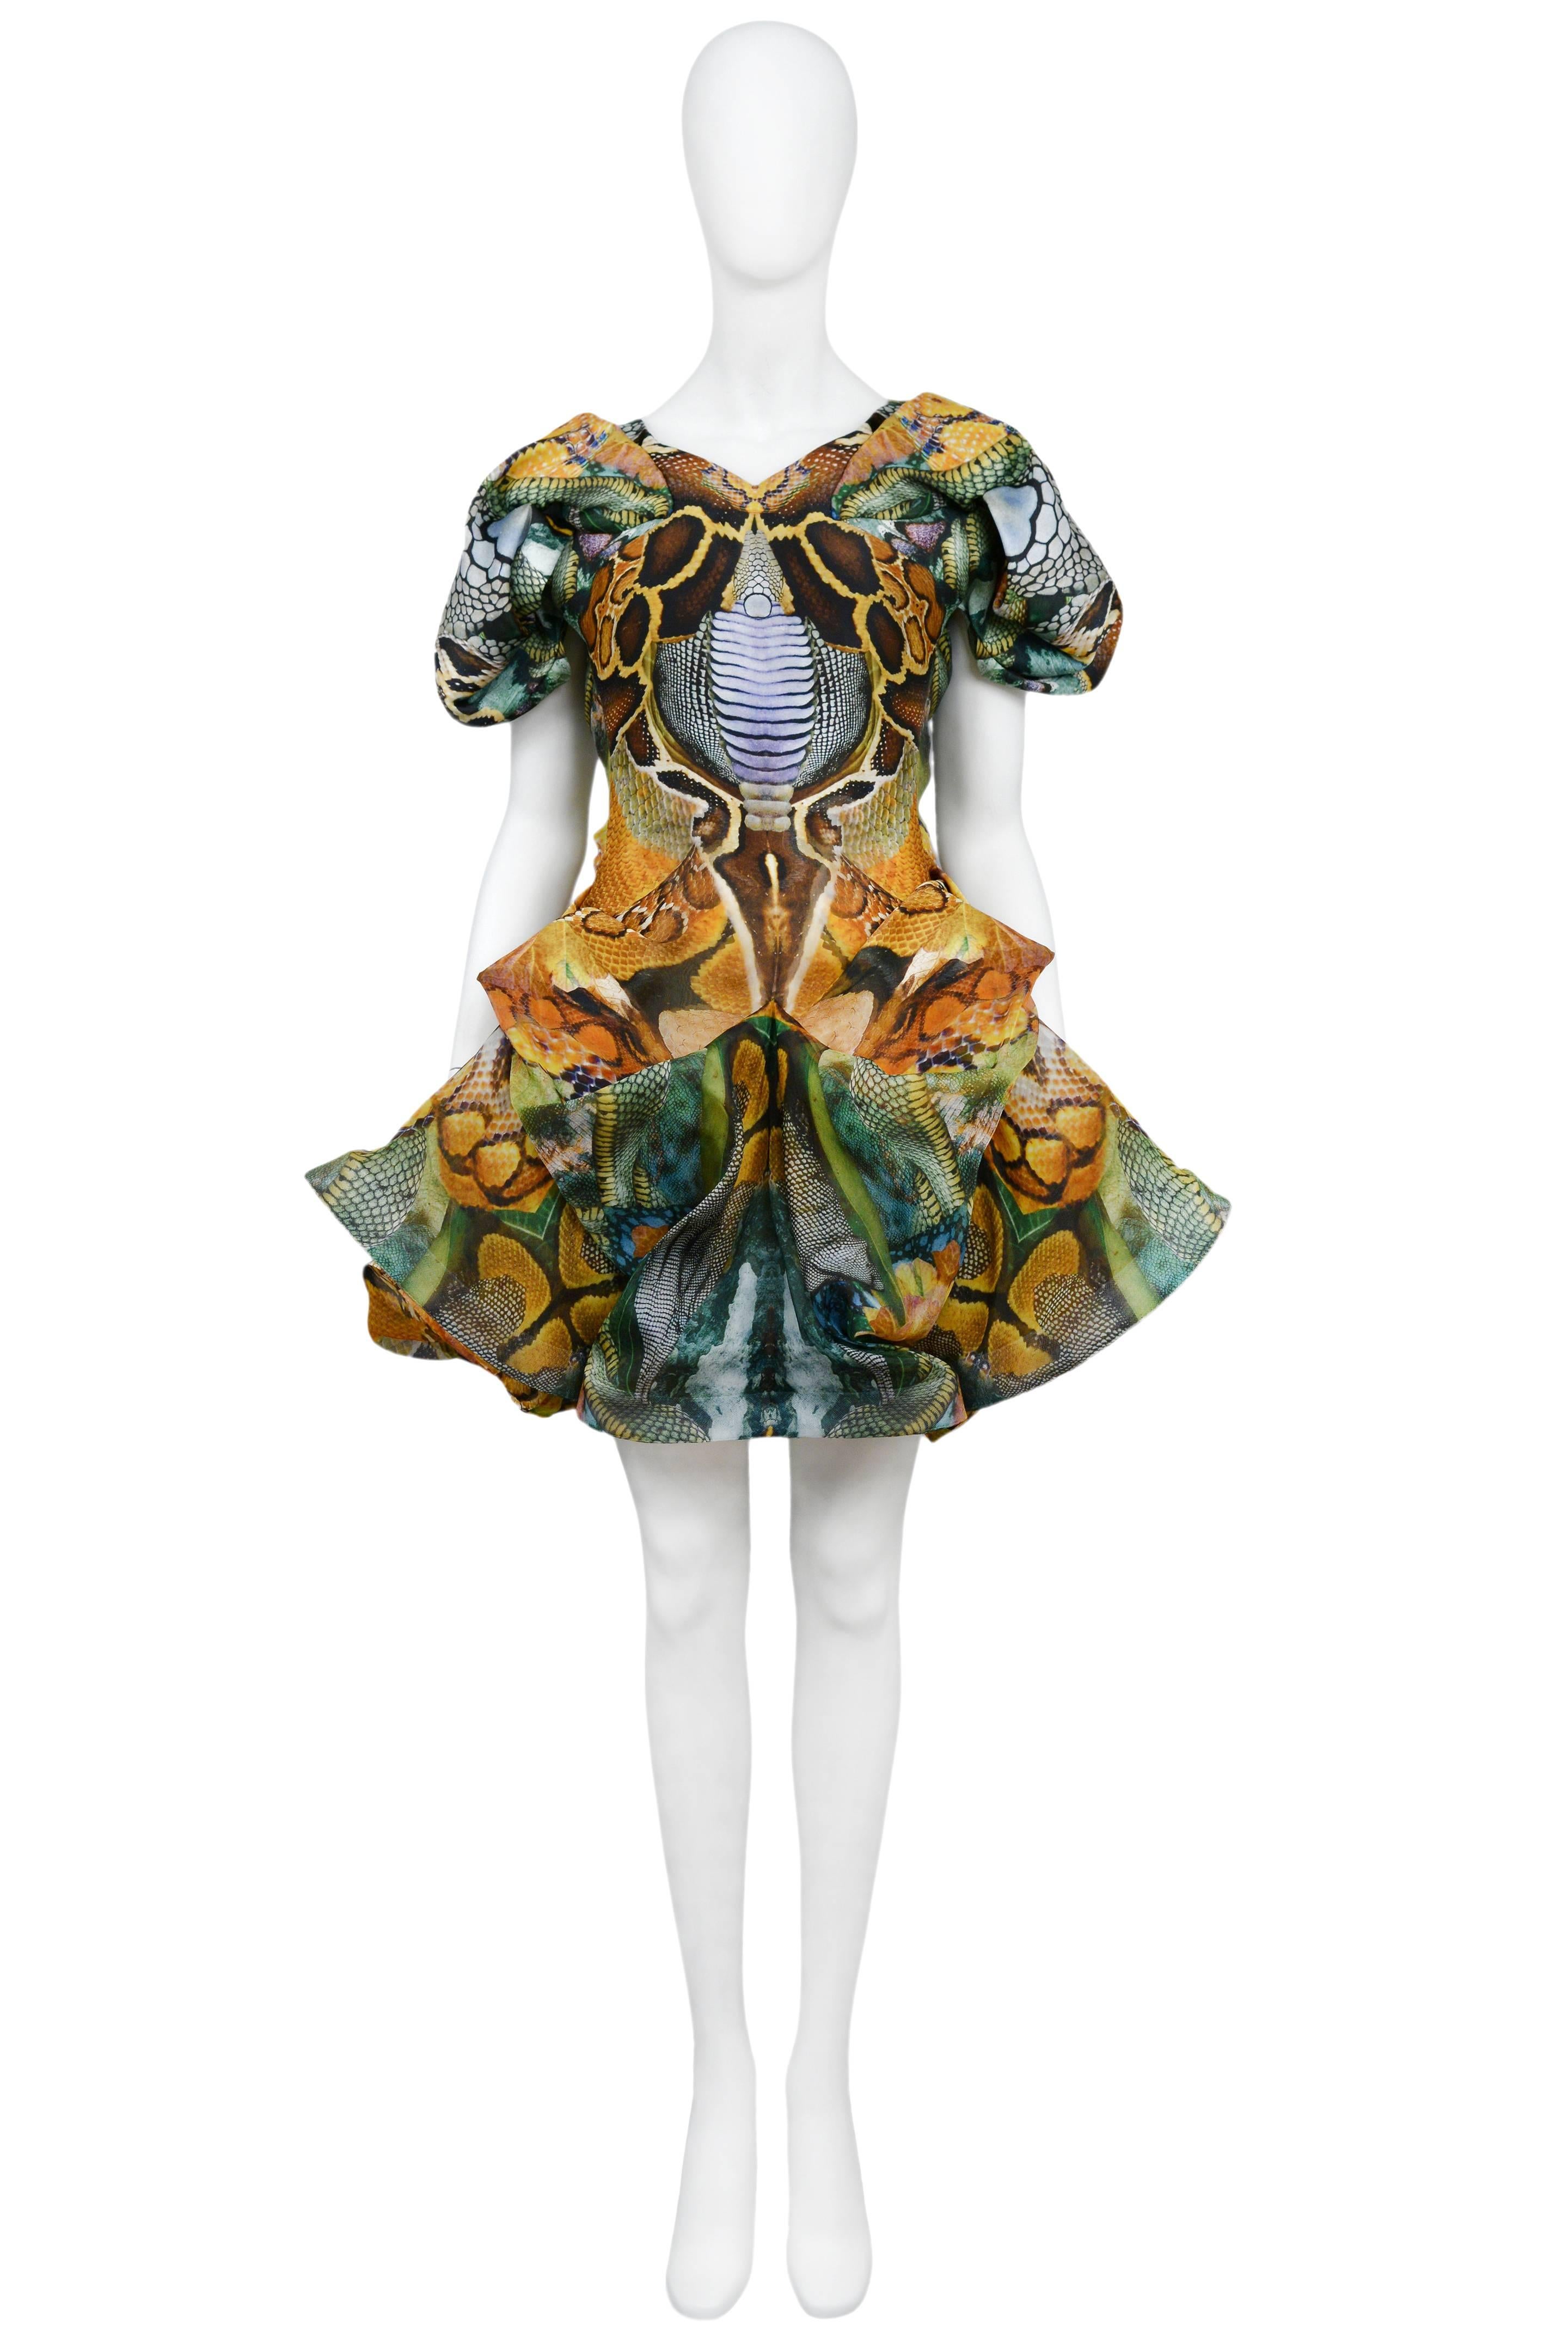 Vintage Alexander McQueen Plato's Atlantis organza dress featuring an allover multi-color digital print, short gathered sleeves and various tucks and gathers throughout the above the knee skirt. Runway piece from the Spring / Summer 2010 Collection.